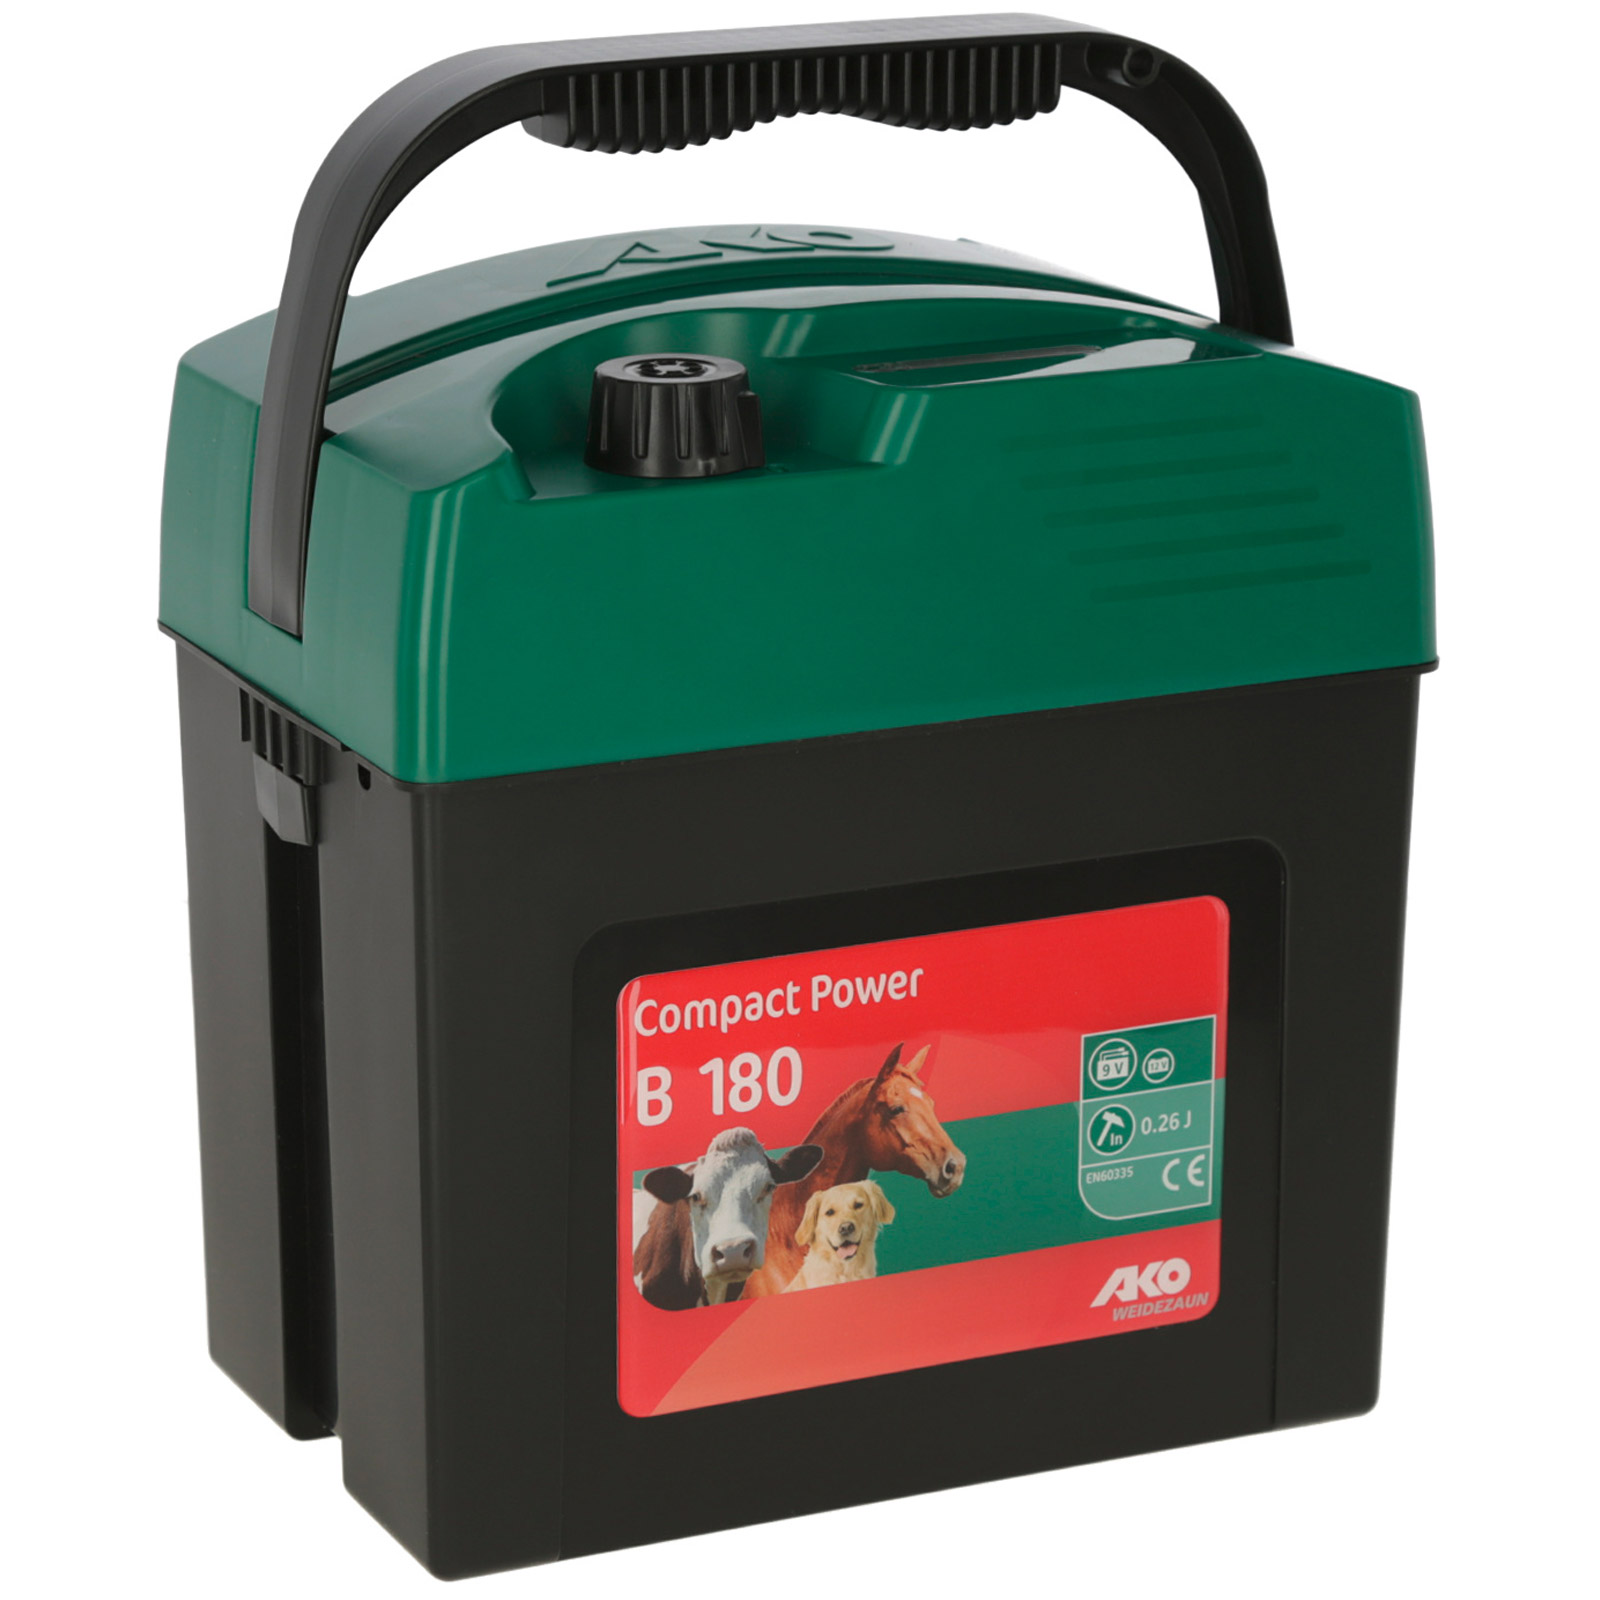 AKO Compact Power B 180 Electric fence energiser 9V, 0.26 Joule, green